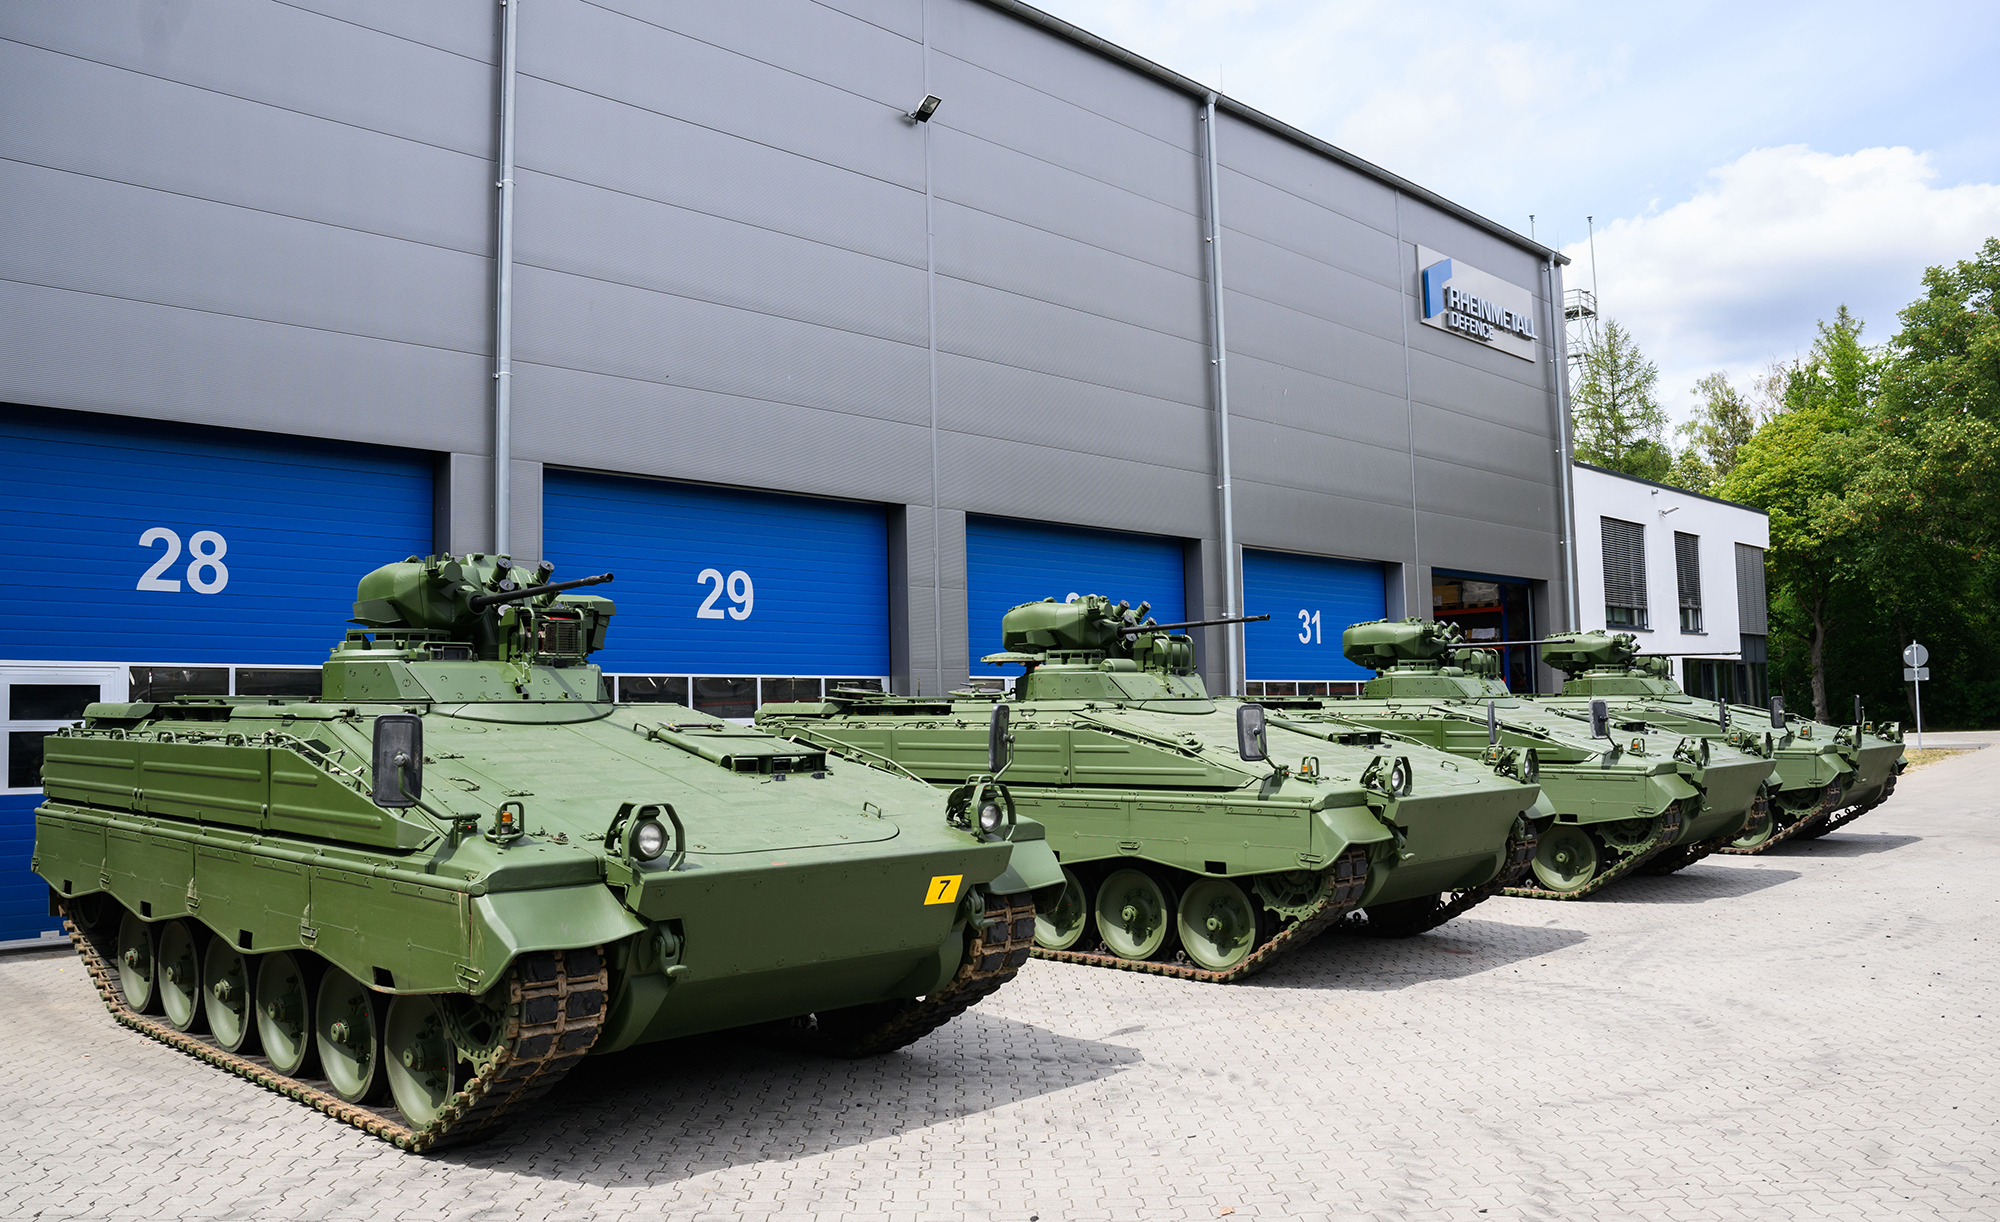 Reconditioned Marder infantry fighting vehicles on display at Rheinmetall's Unterluess plant on July 14 in Lower Saxony, Germany.